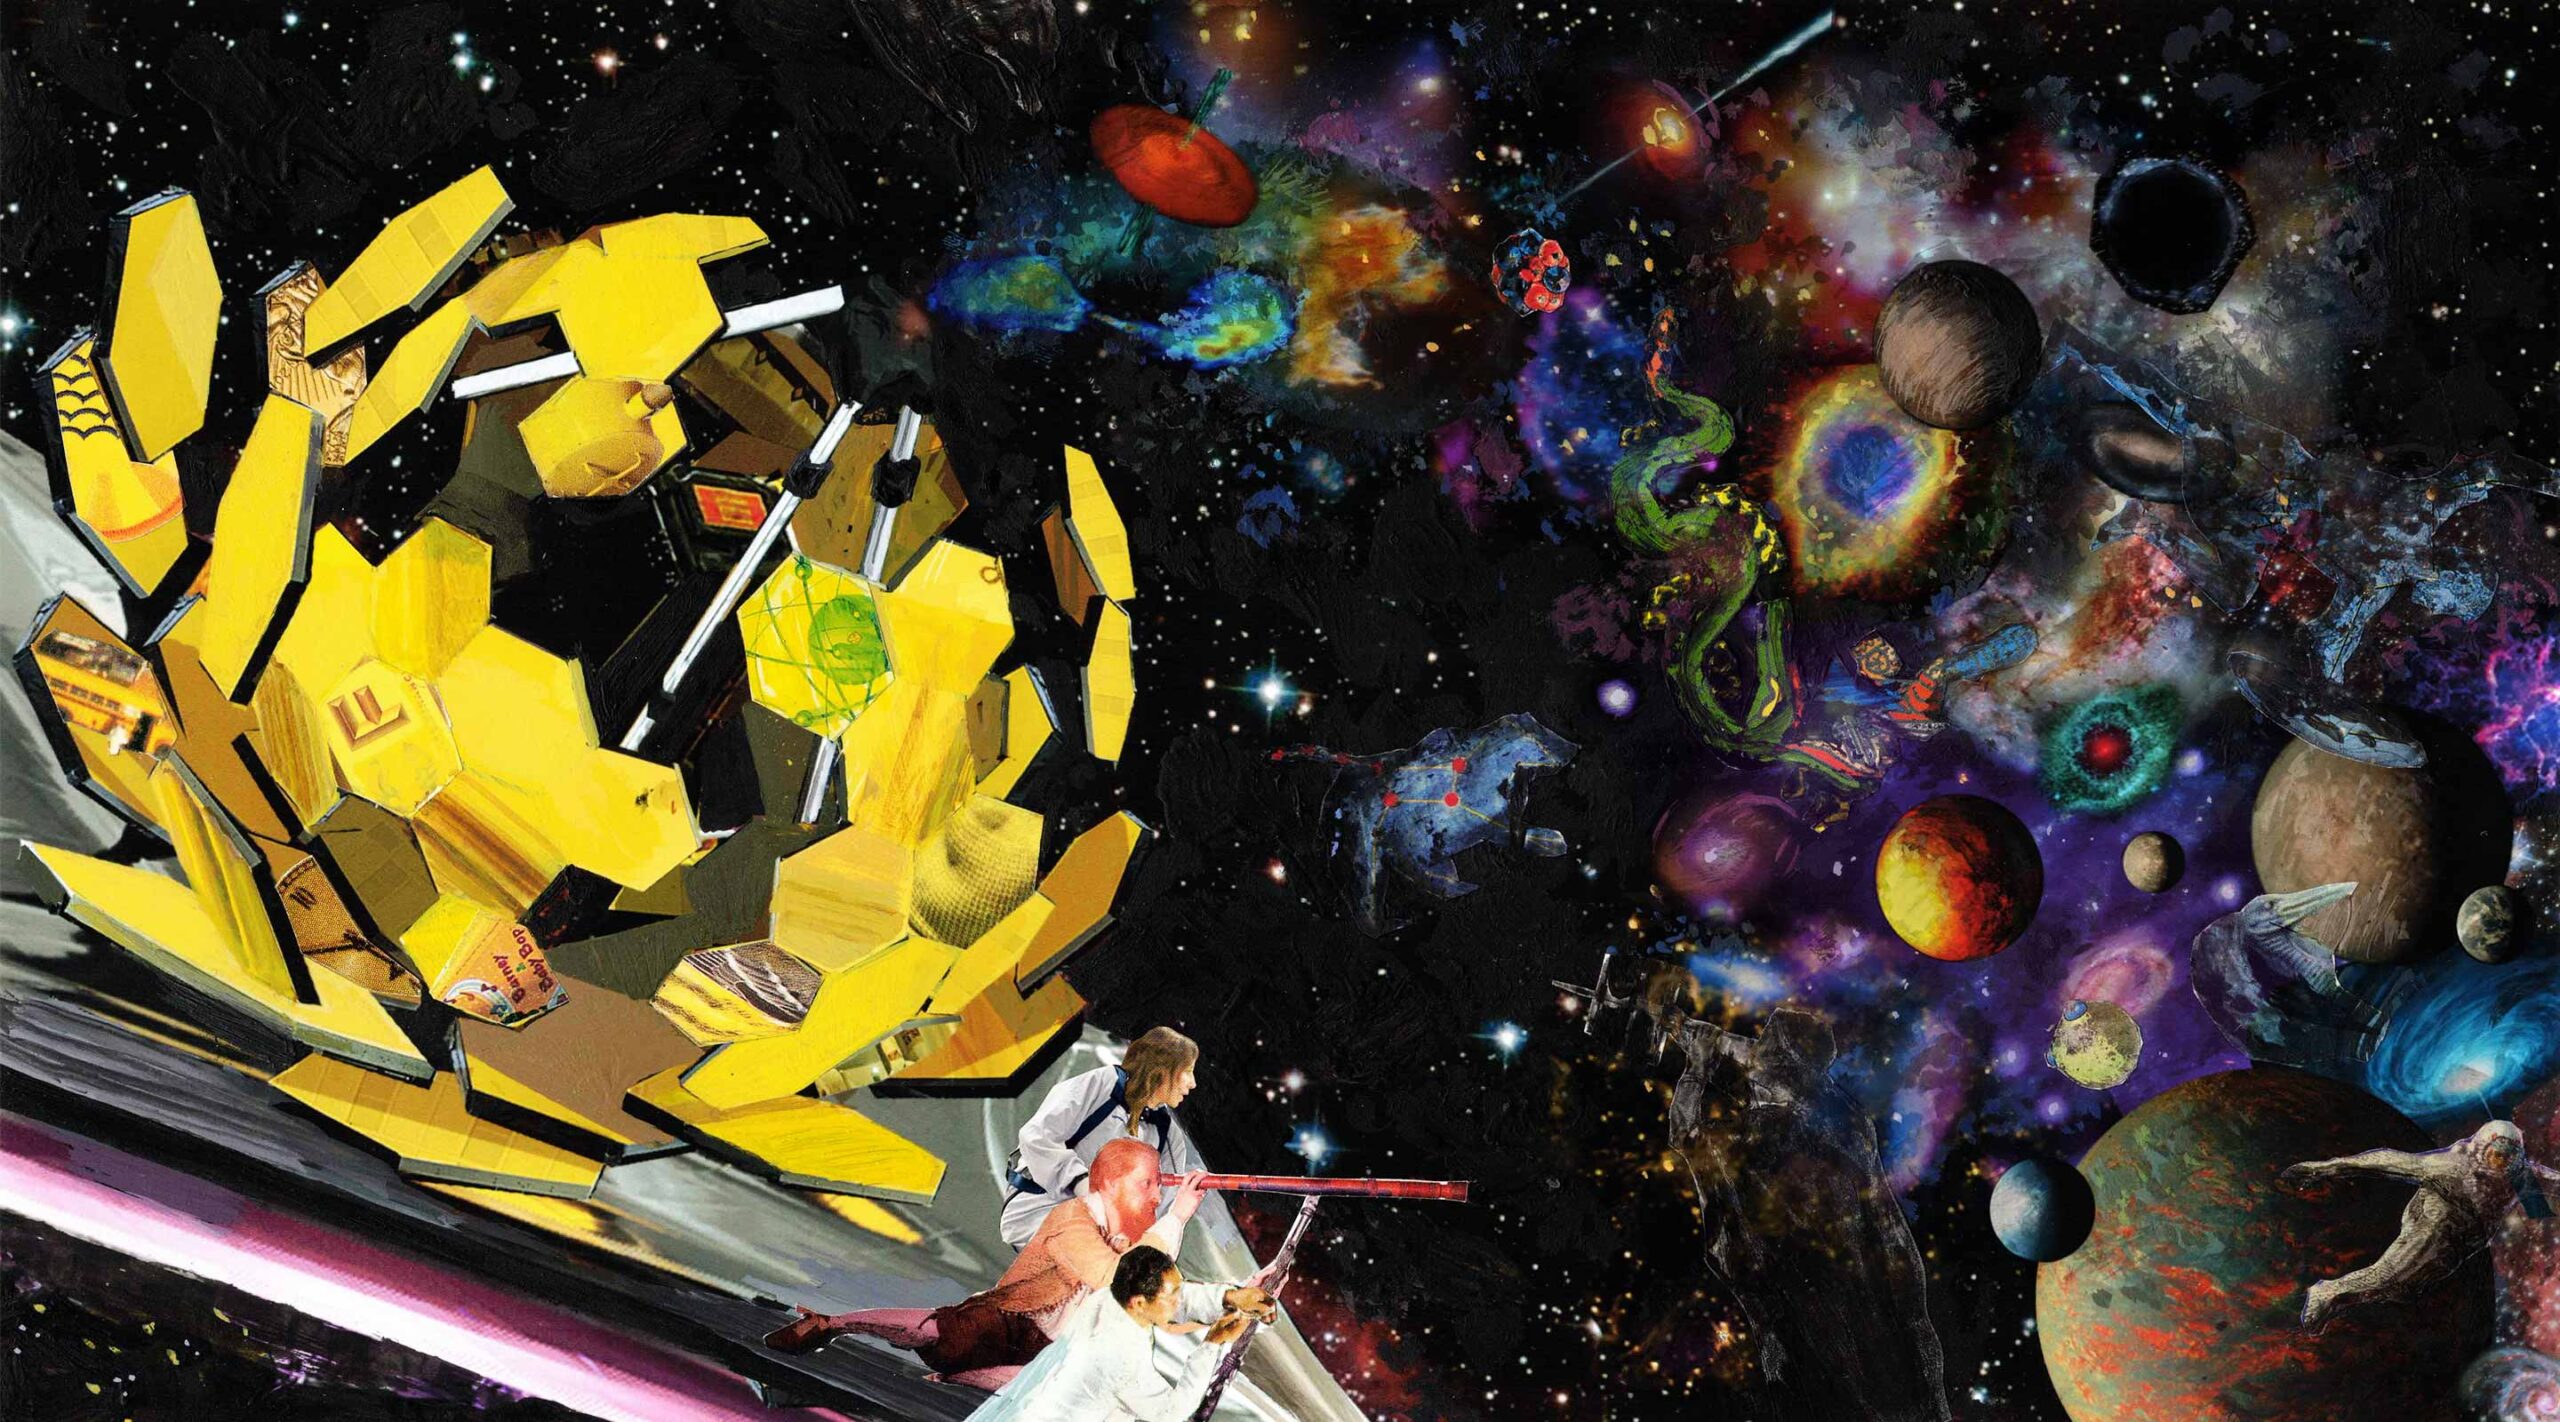 This illustration shows the James Webb Space Telescope next to stylized images of planets and stars.